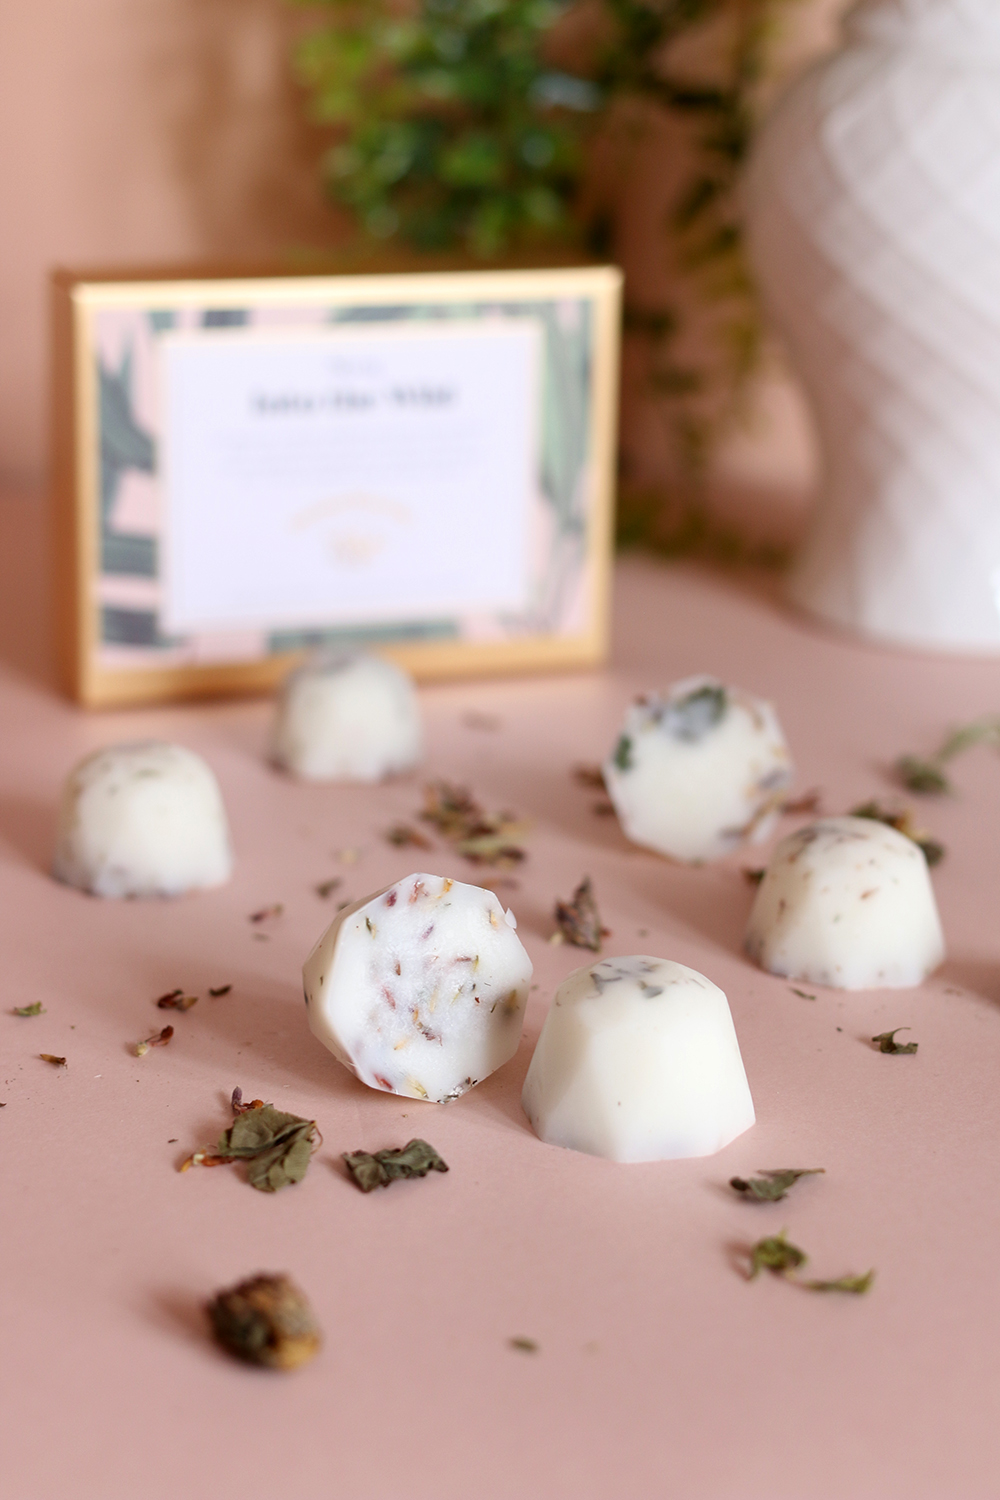 Into the Wild cedarwood vetiver and fir scented wax melts